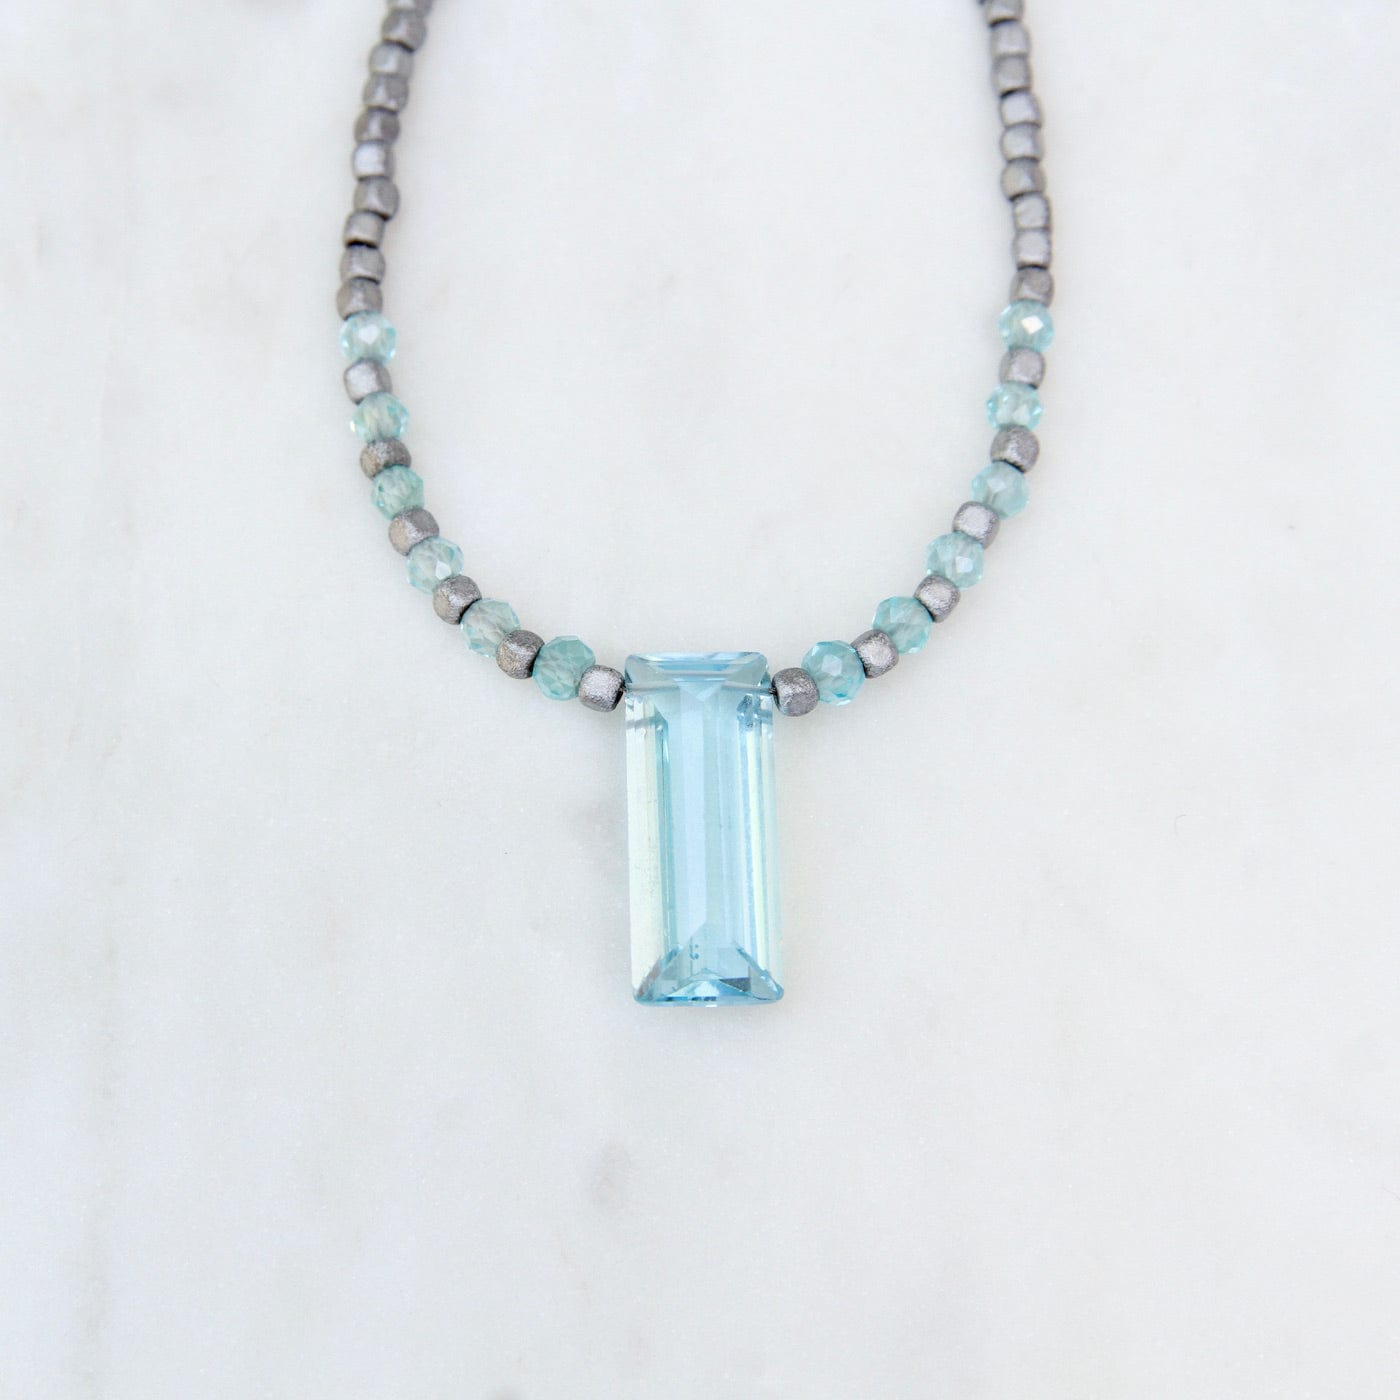 NKL Strung Hematite with Blue Topaz Rectangle Necklace